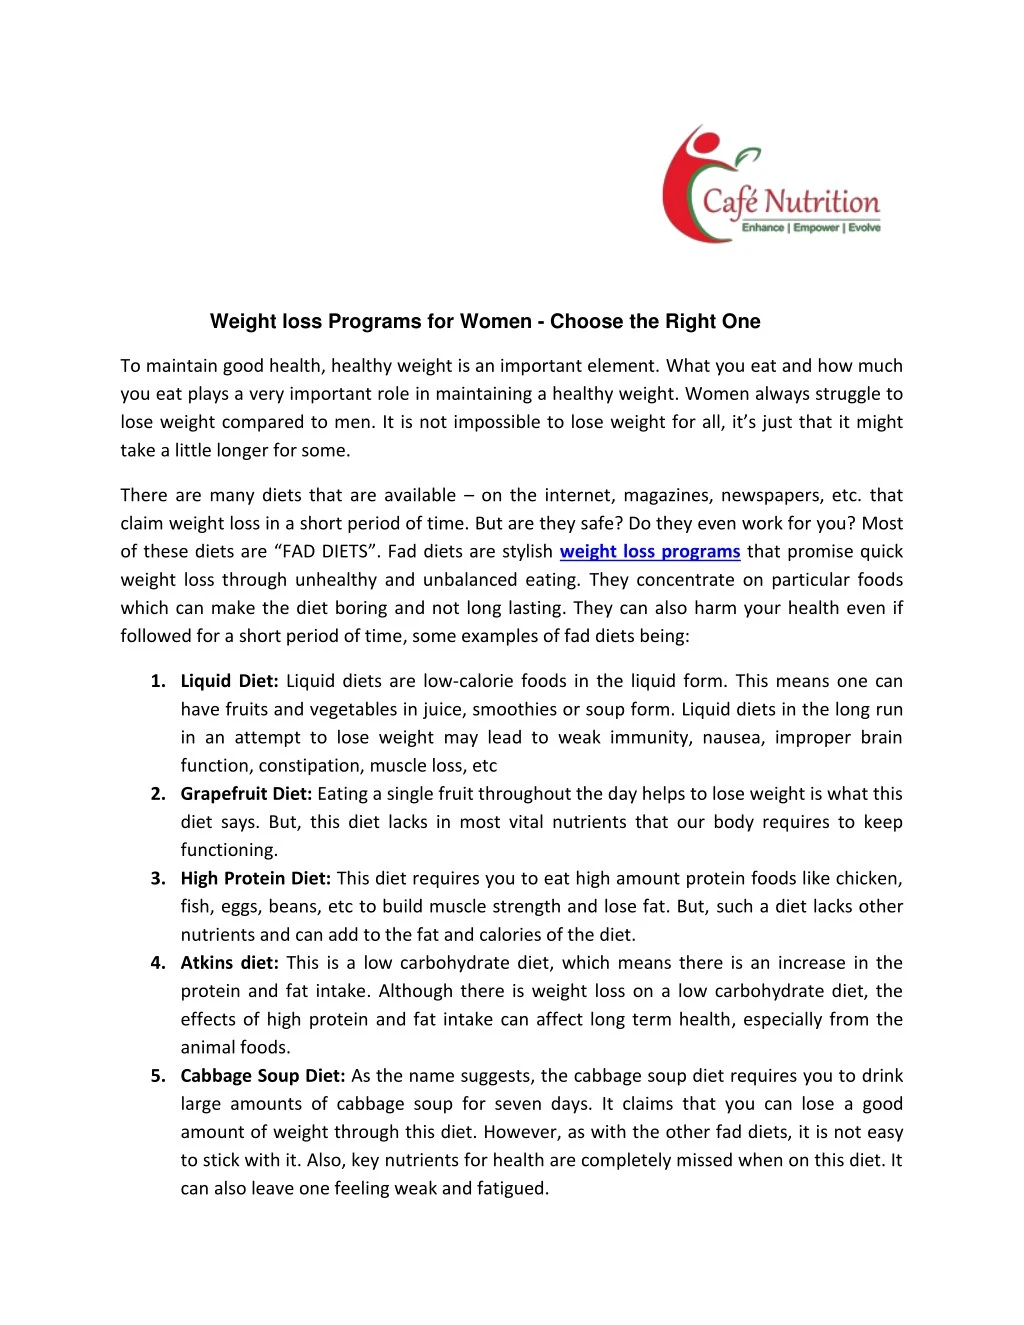 weight loss programs for women choose the right